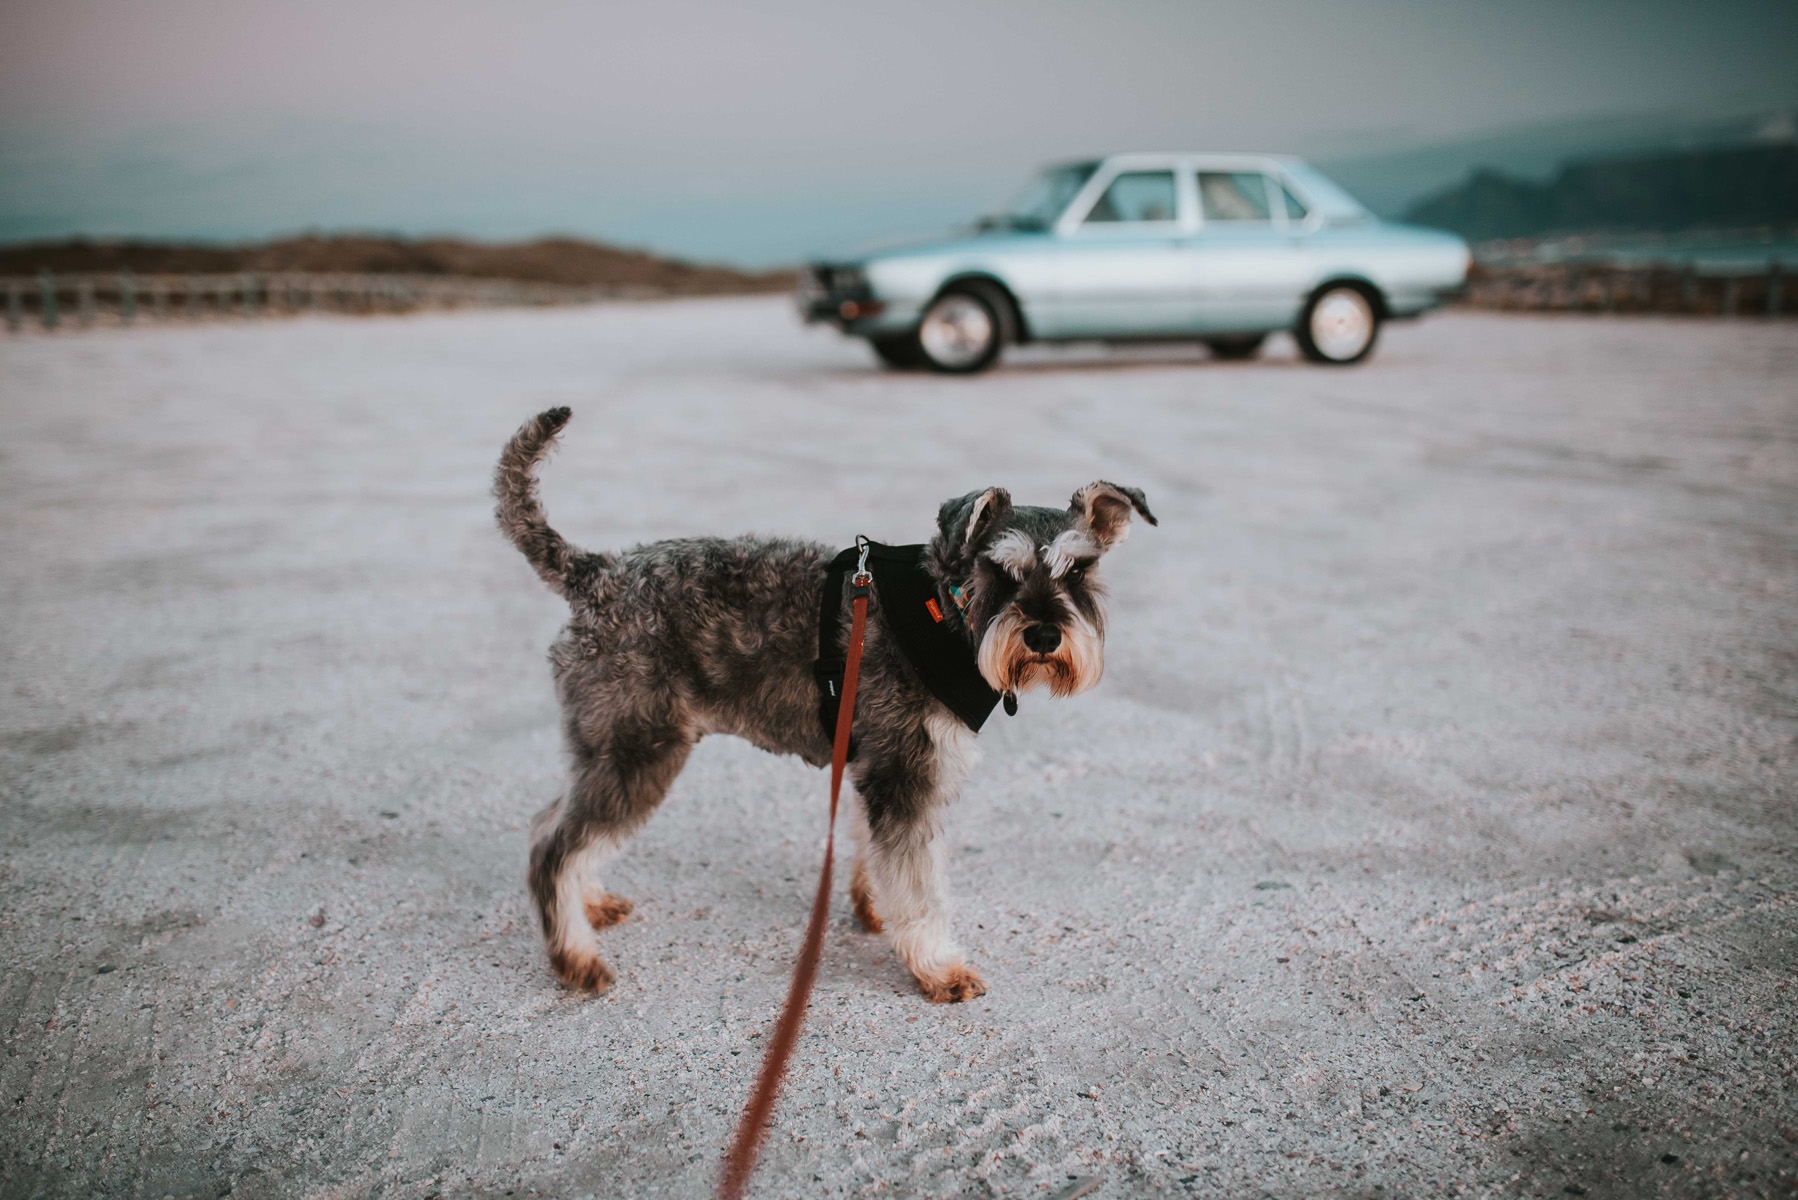 black and white dog on red leash in dirt with blue car behind